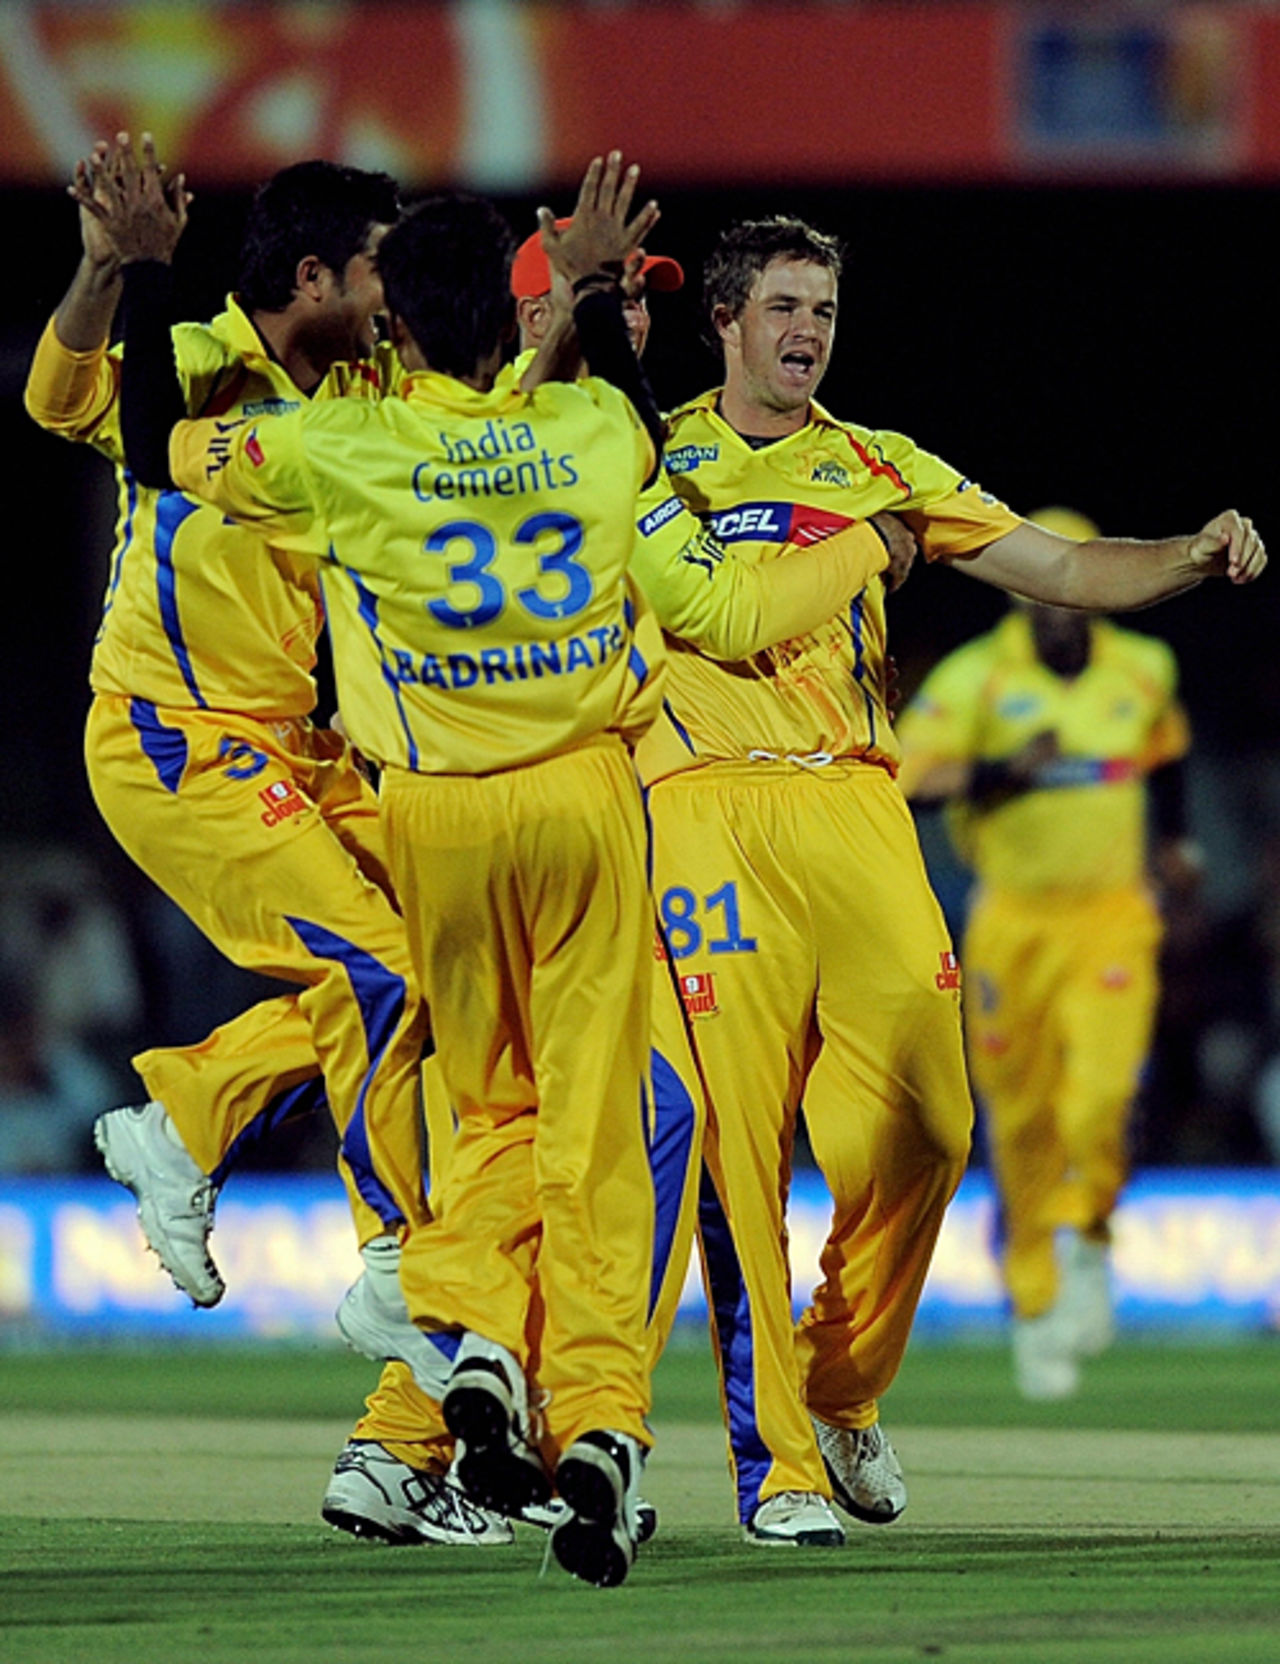 Team-mates mob Albie Morkel after he dismissed VVS Laxman, Chennai Super Kings v Deccan Chargers, IPL, 29th match, East London, May 4, 2009